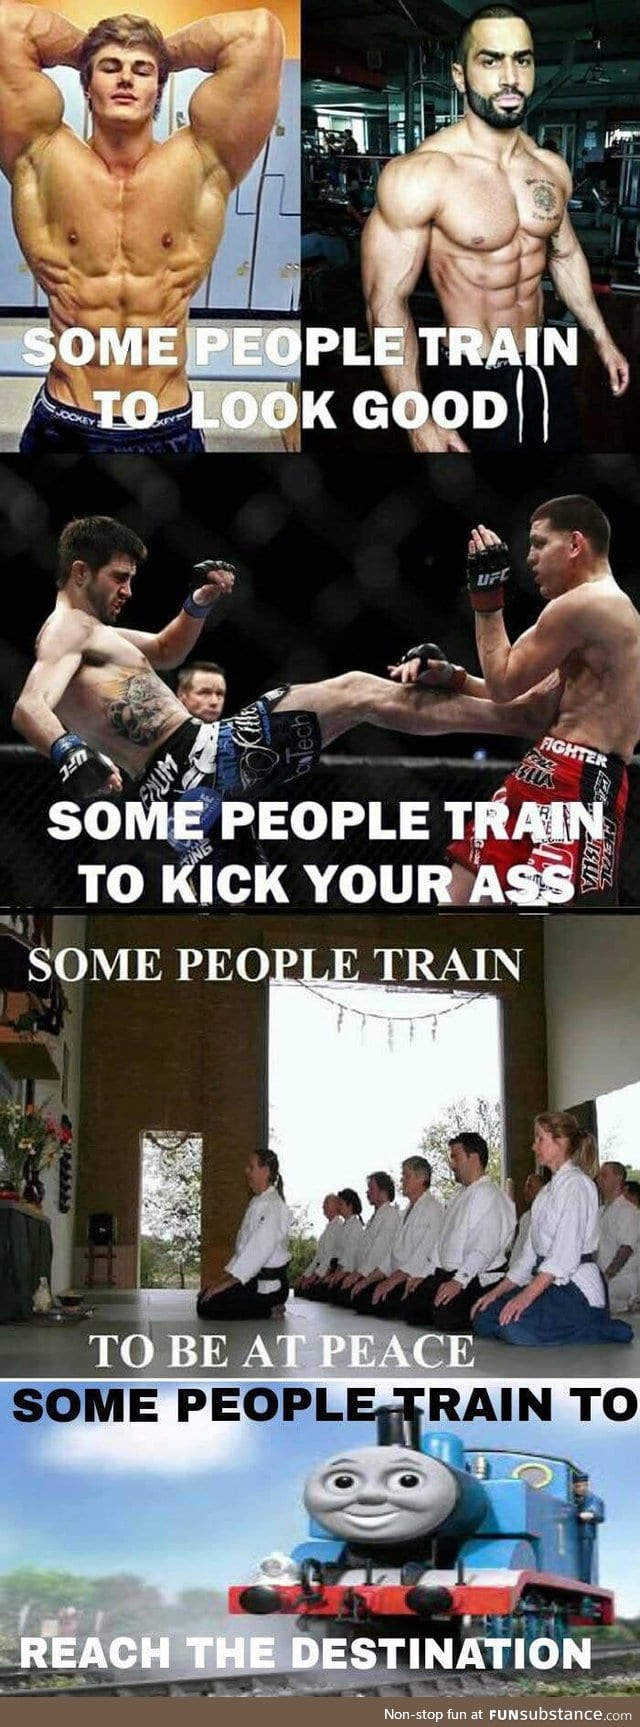 Reasons people train for